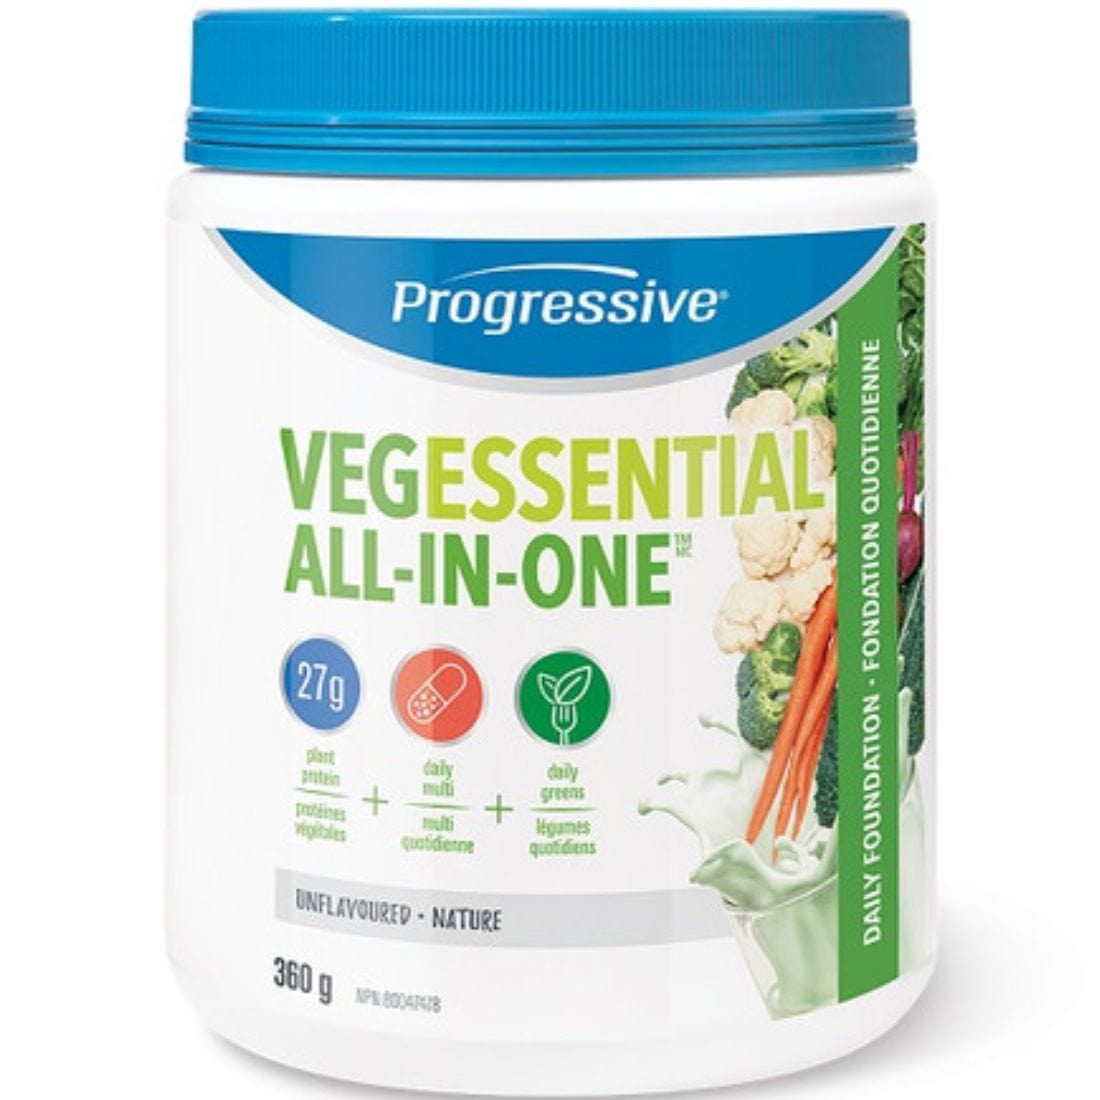 Progressive VegEssential All in One (Daily Nutrition in 1 Scoop)